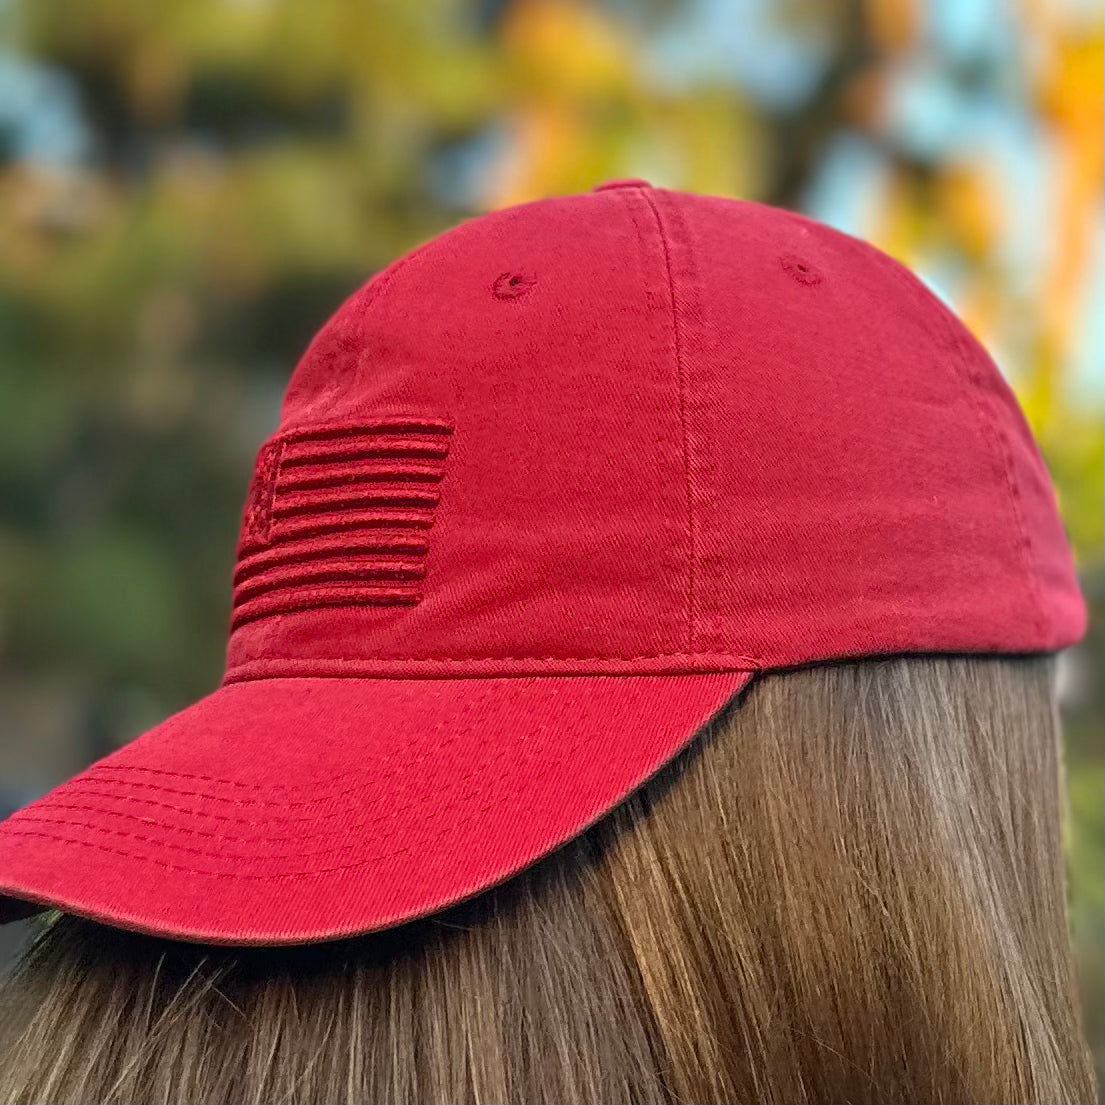 Torrey Pines Stealth USA Low Profile Cap - Red